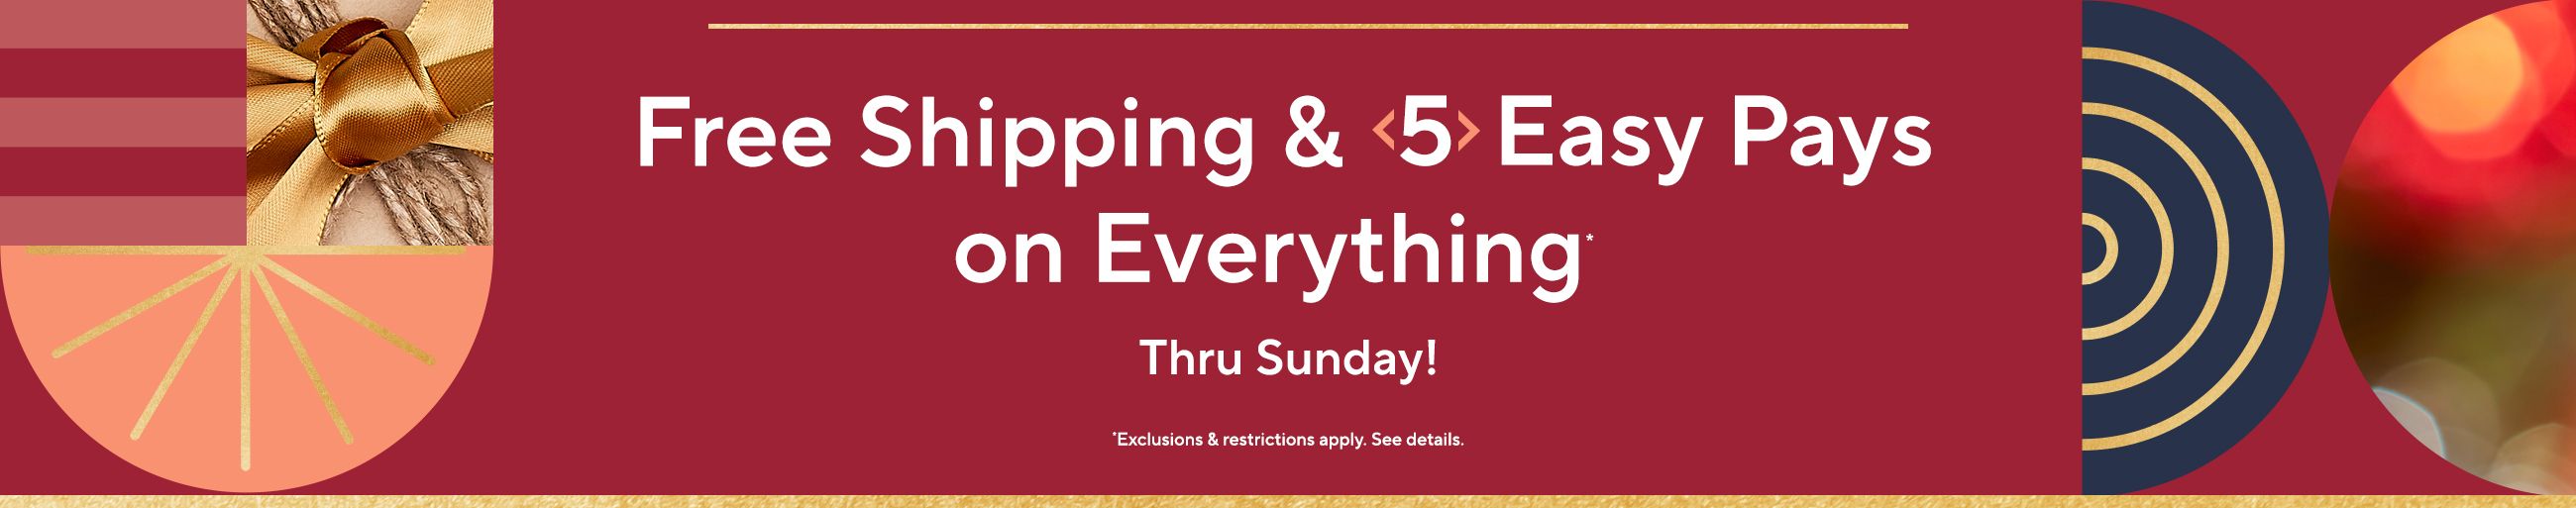 Free Shipping & 5 Easy Pays on Everything* Thru Sunday!   *Exclusions & restrictions apply. See details. 